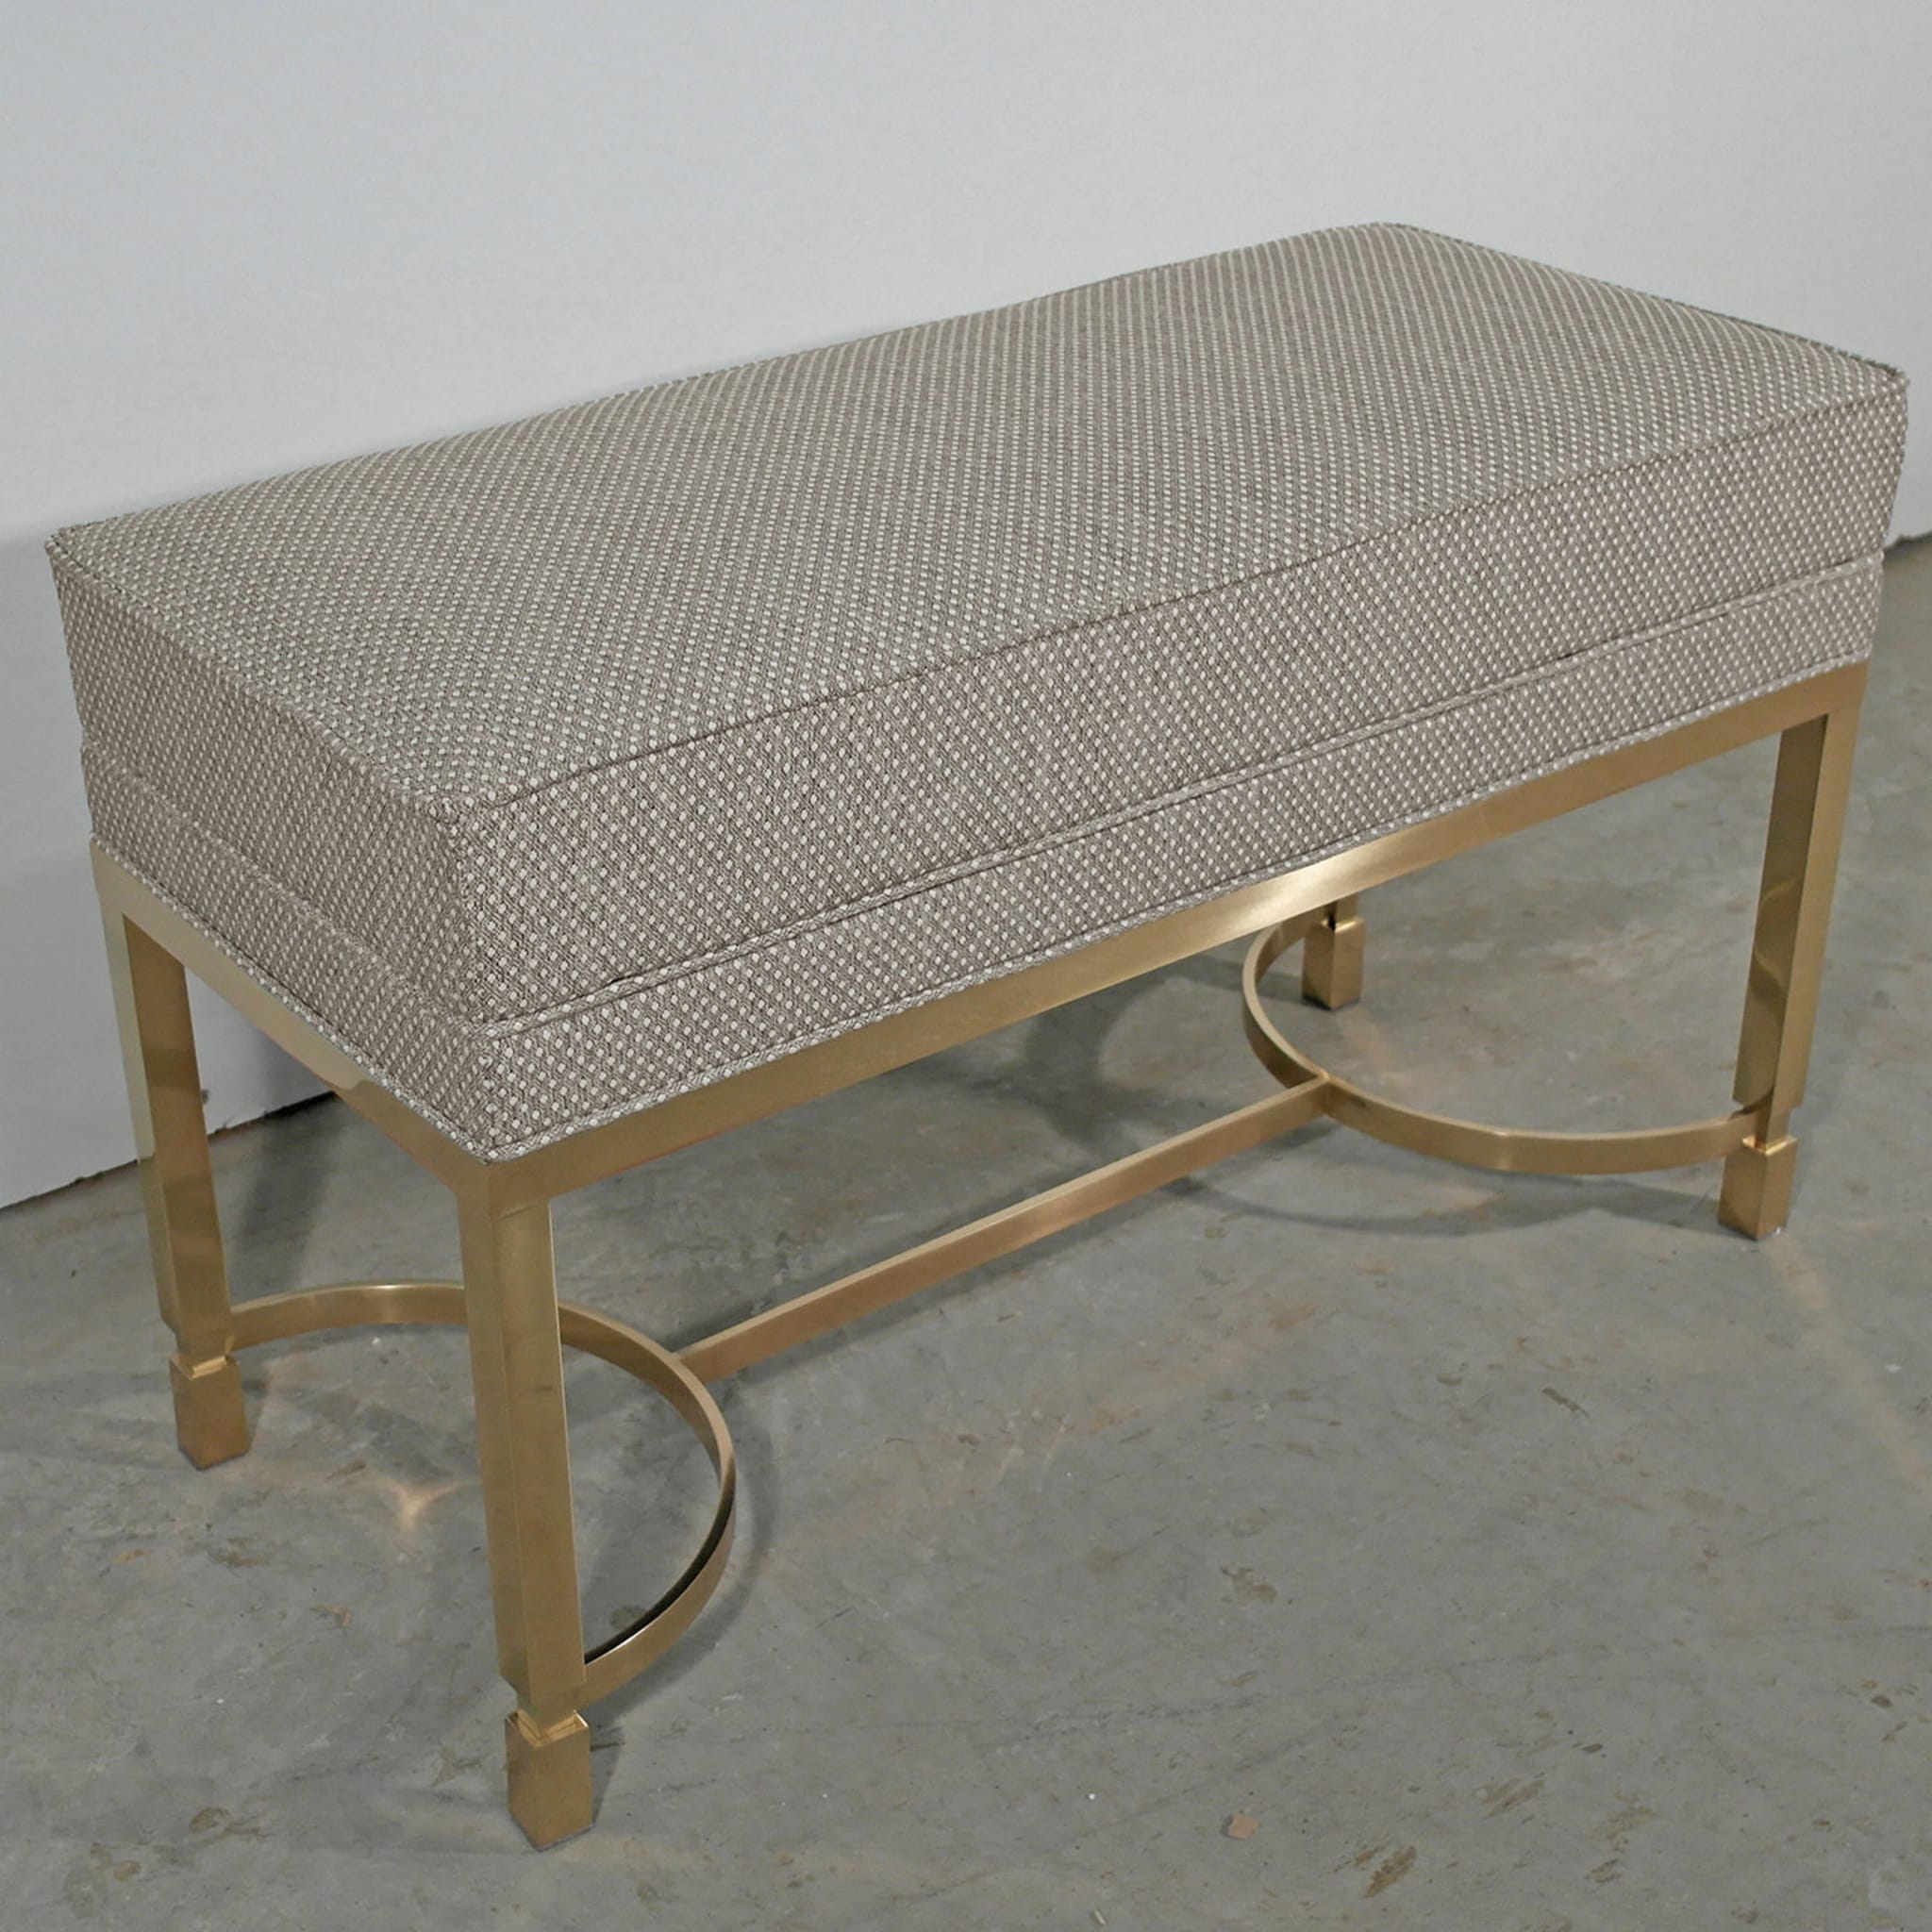 Two-Tone Upholstered Bench - Alternative view 2